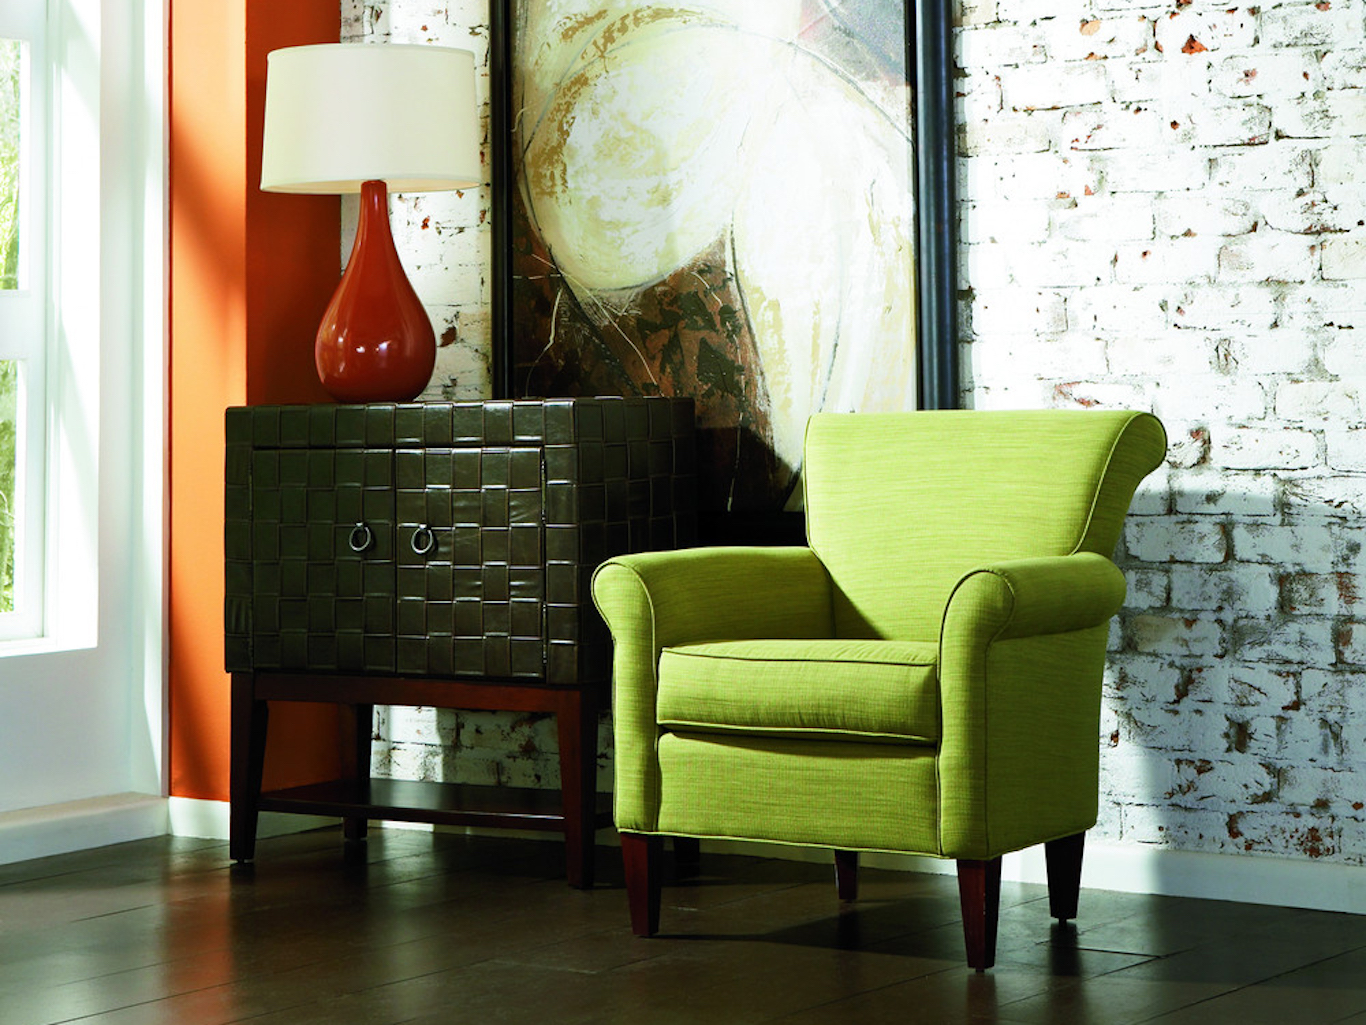 Green armchair, woven black chest with a red table lamp in front of an exposed brick wall